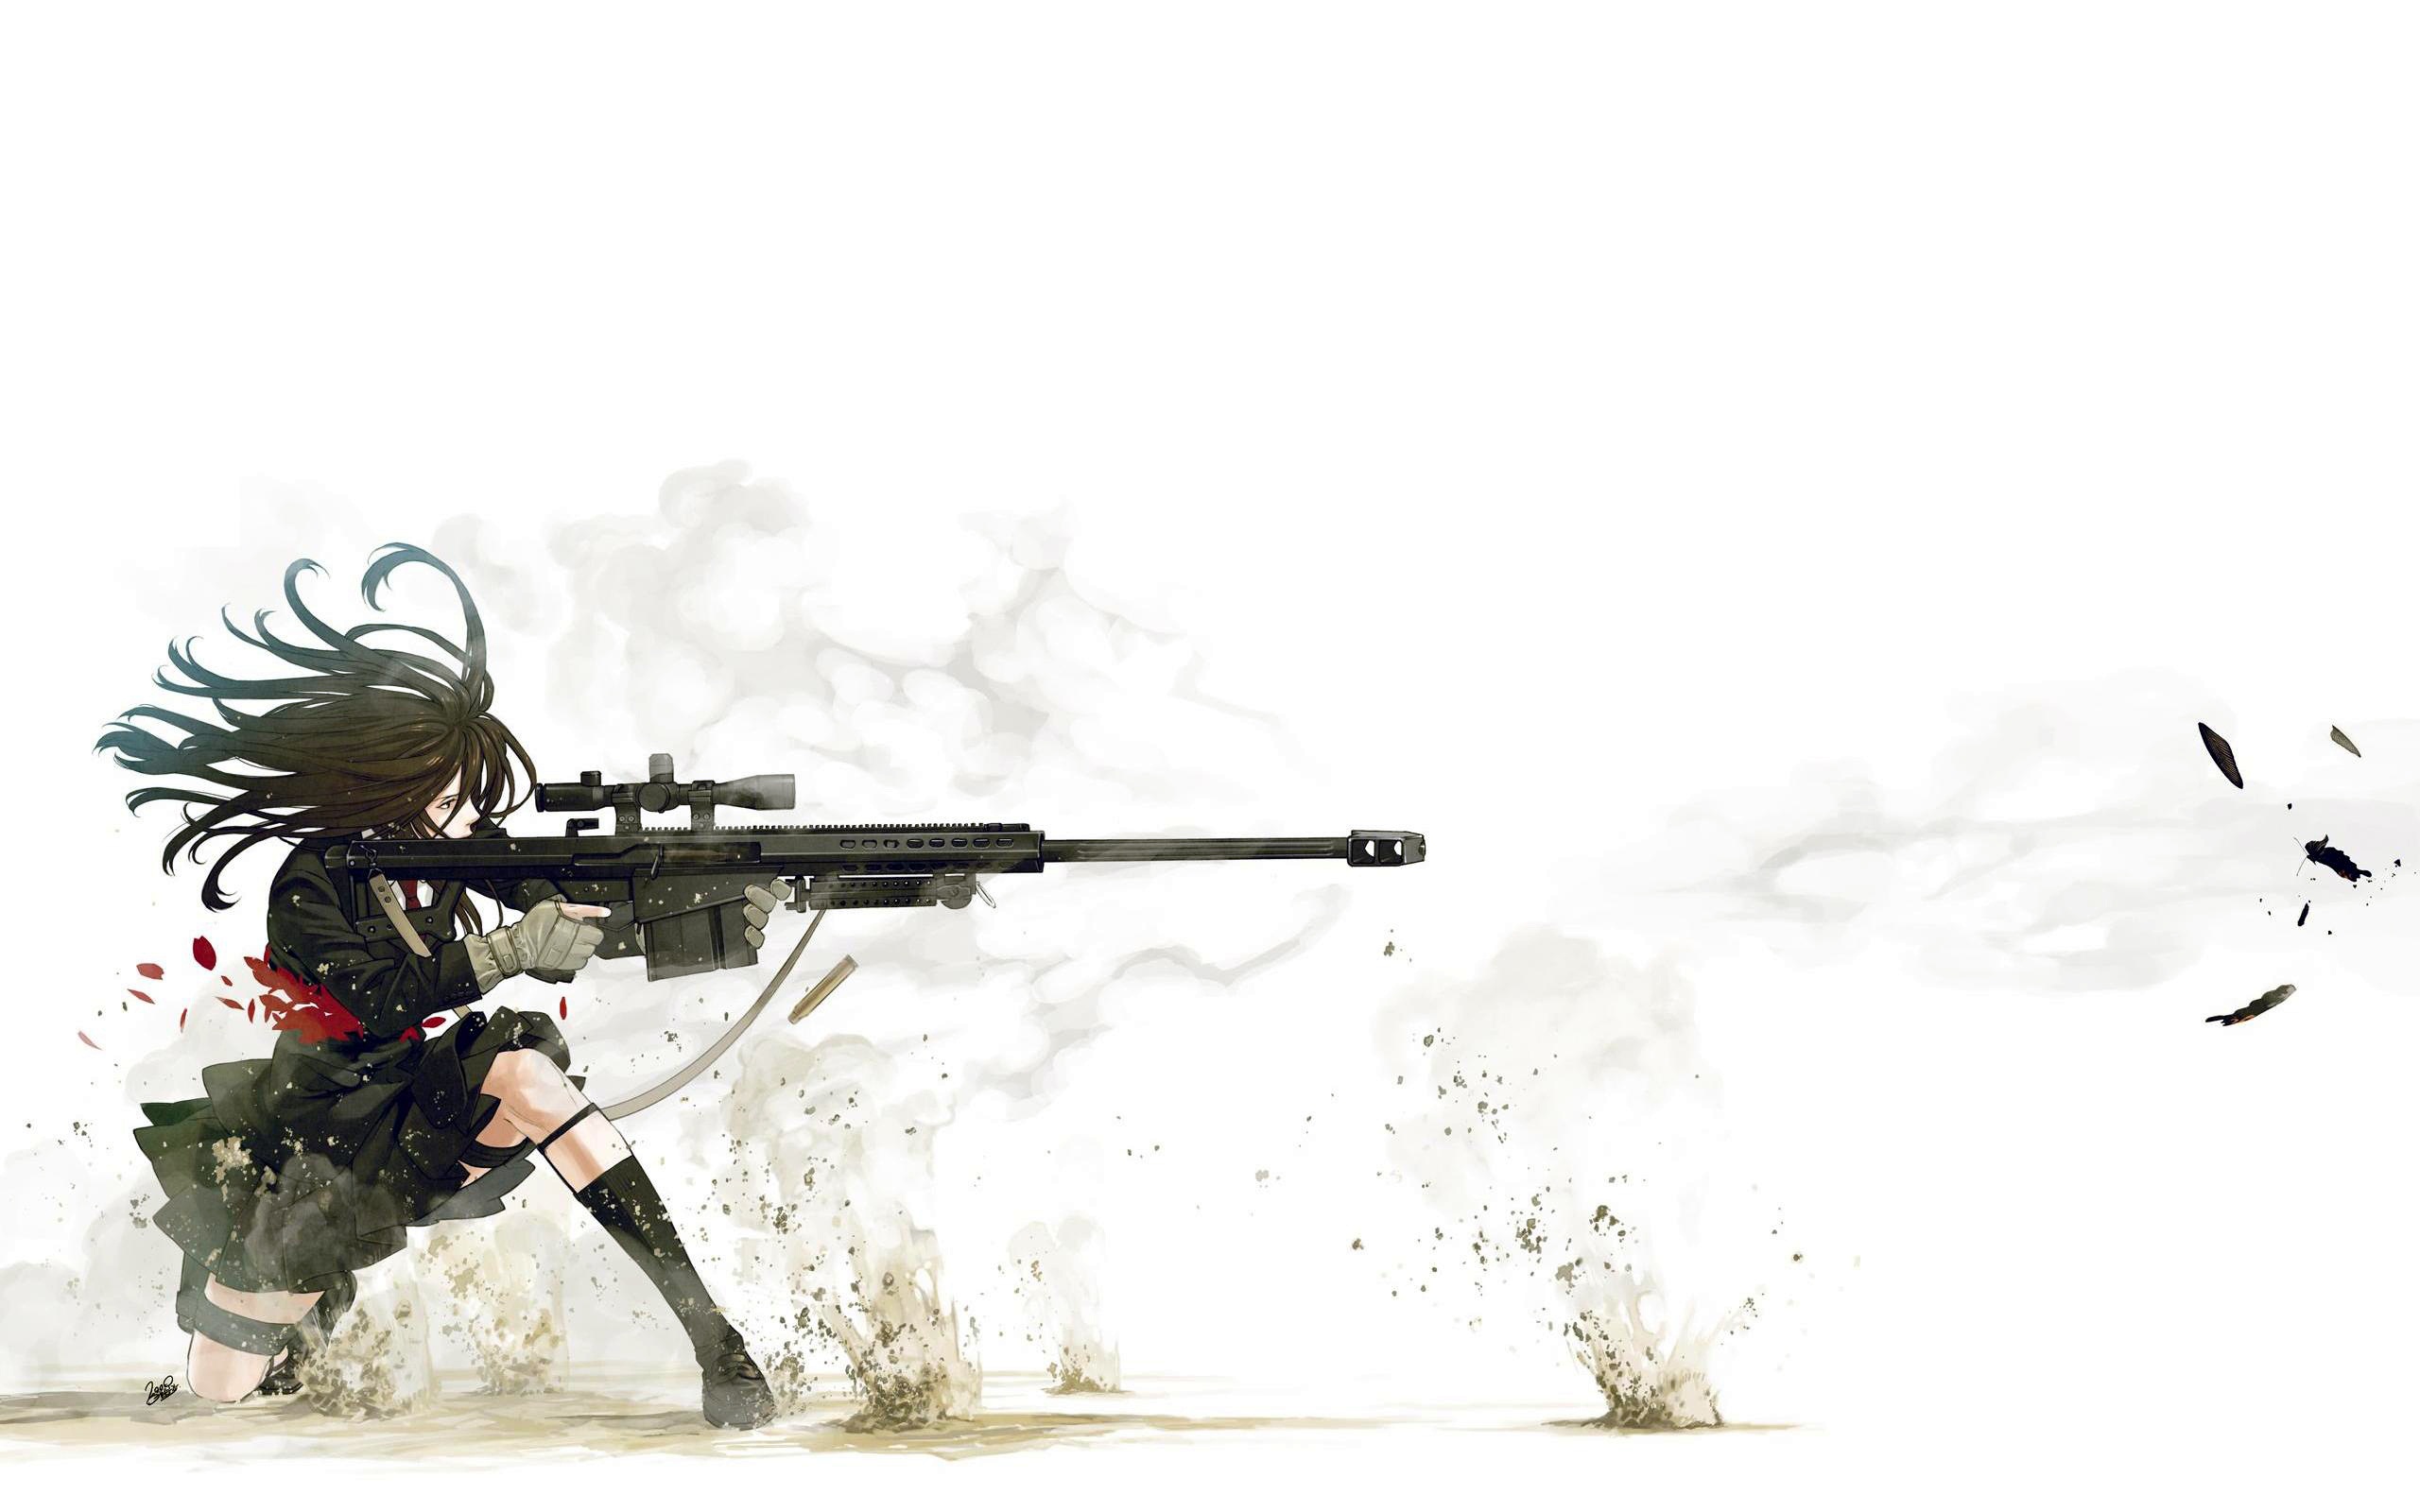 Anime Sniper Wallpapers HD Wallpapers 2560x1600